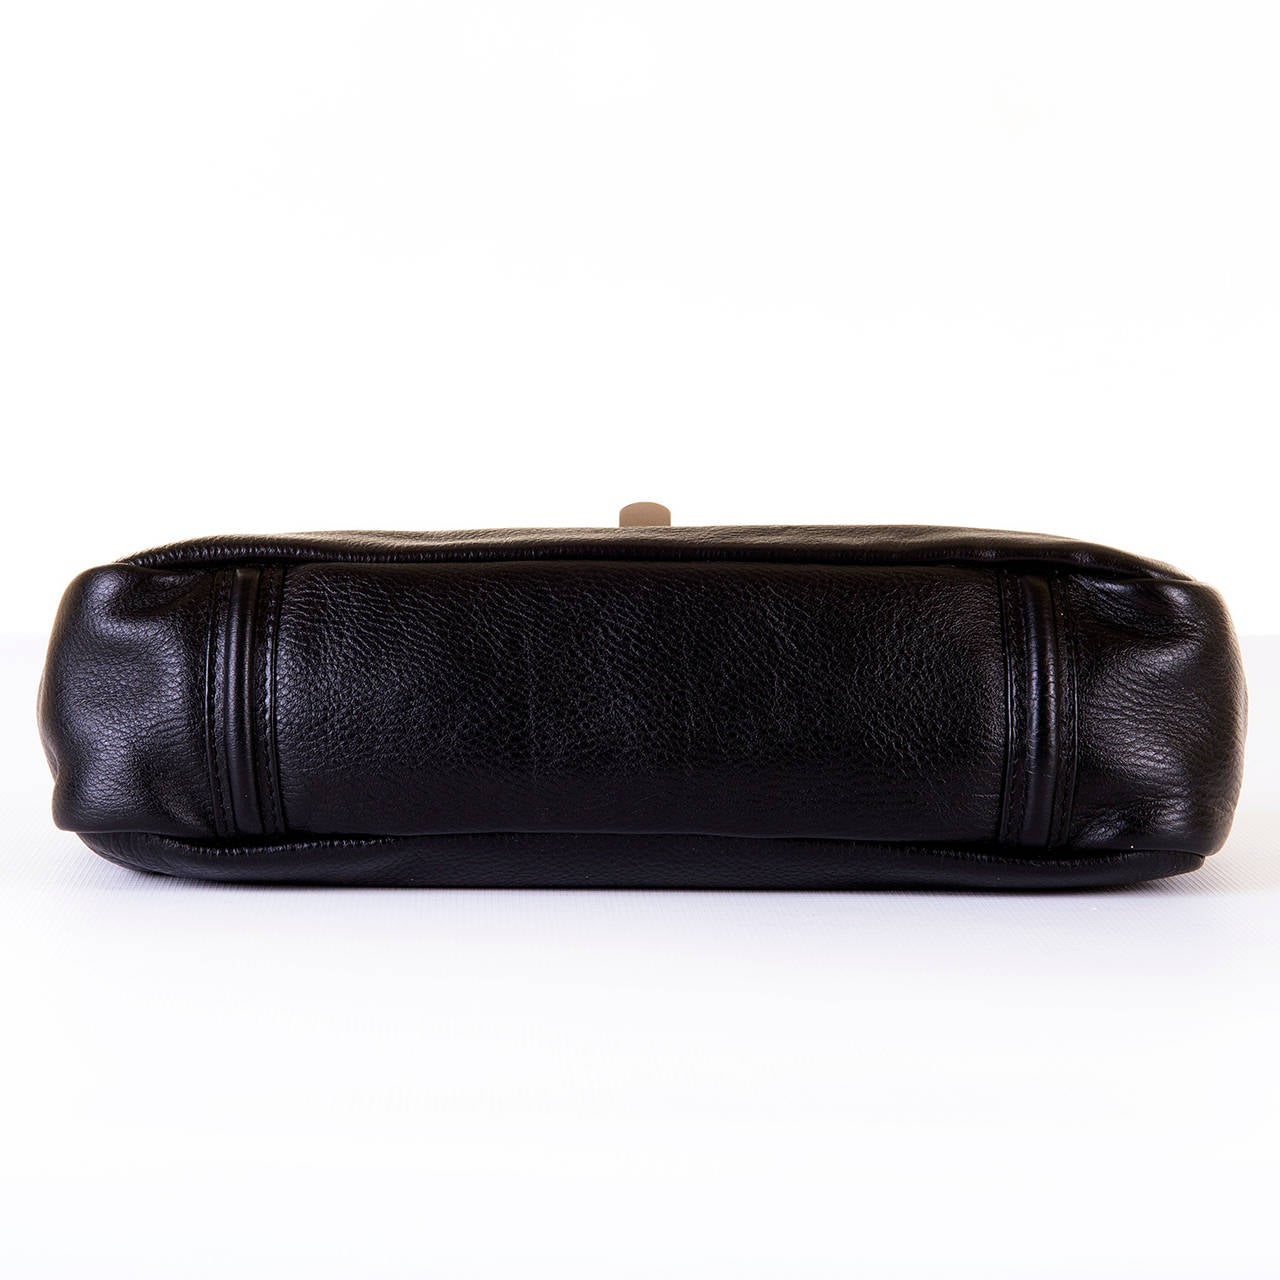 'TRES CHIC' Chanel  Black 'Sac Baguette' with Silver Palladium Hardware 2